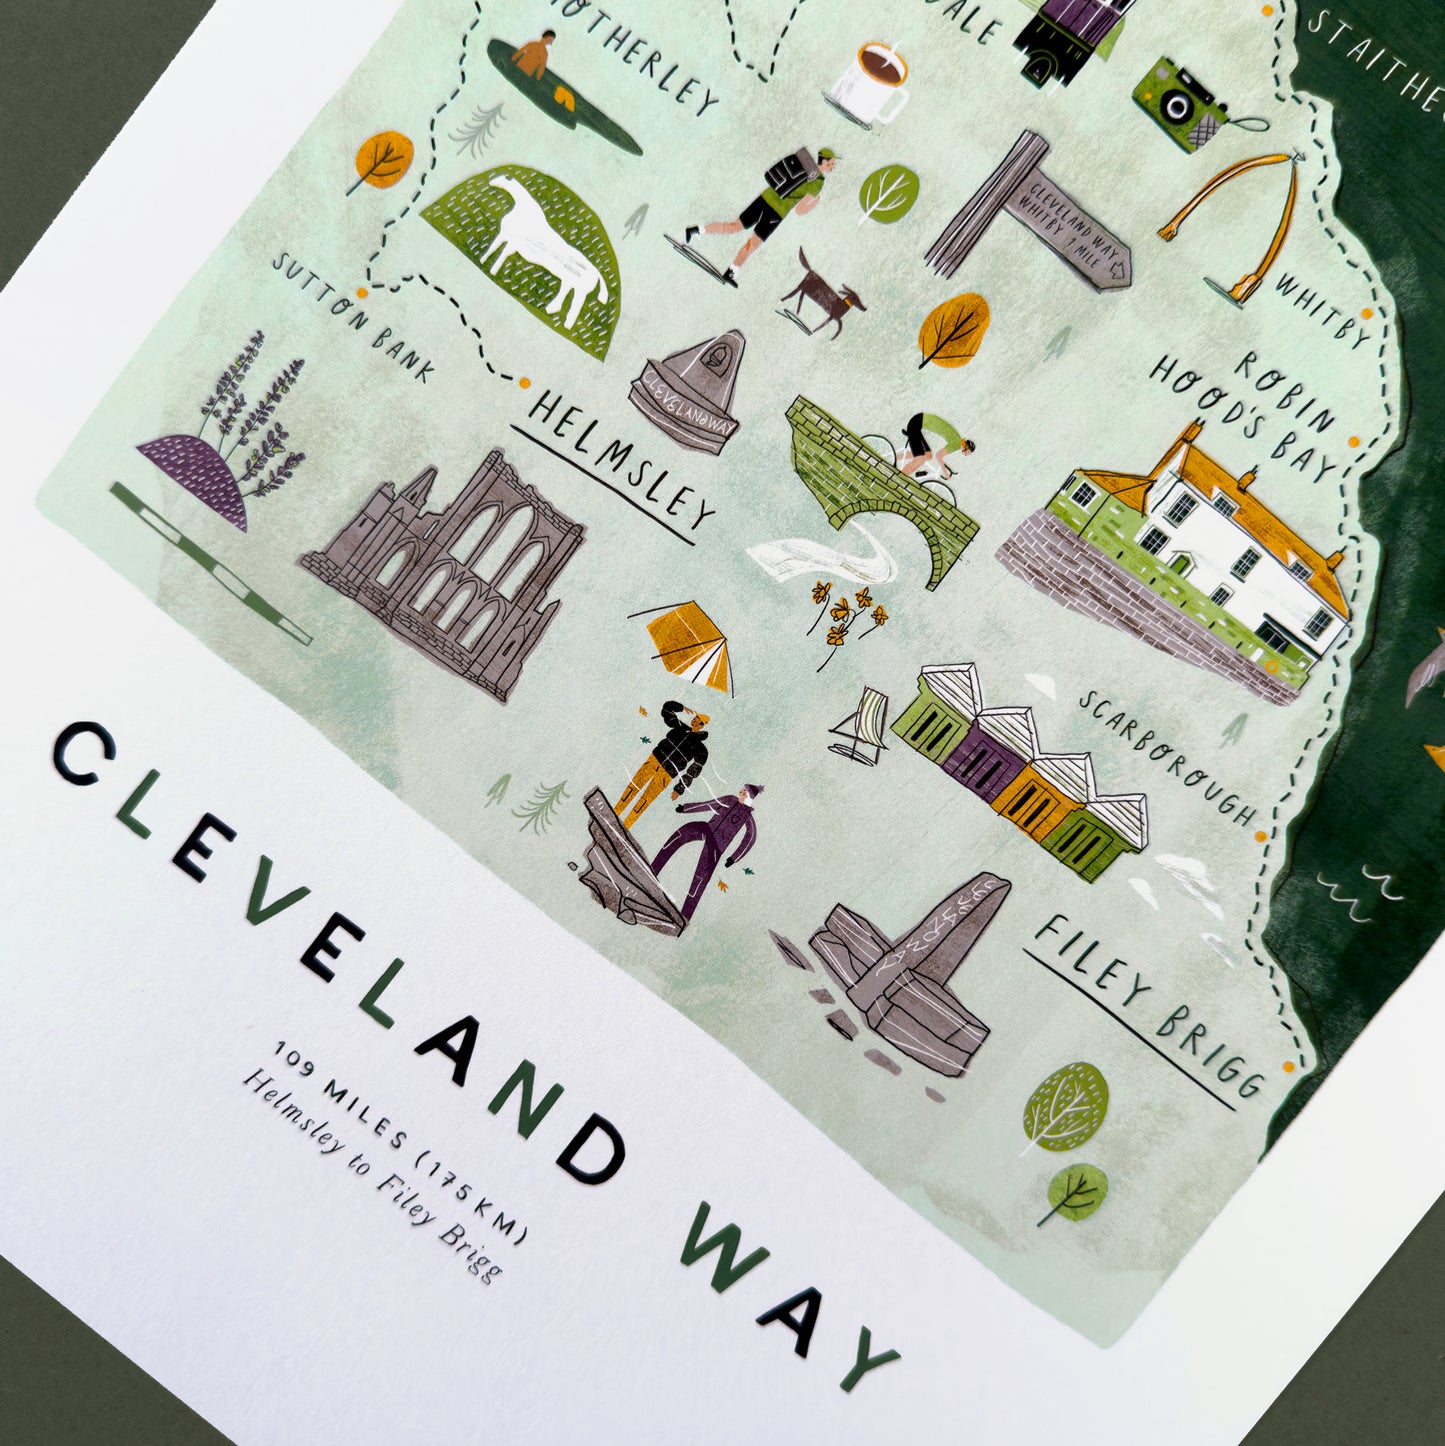 The Cleveland Way A3 Route Map